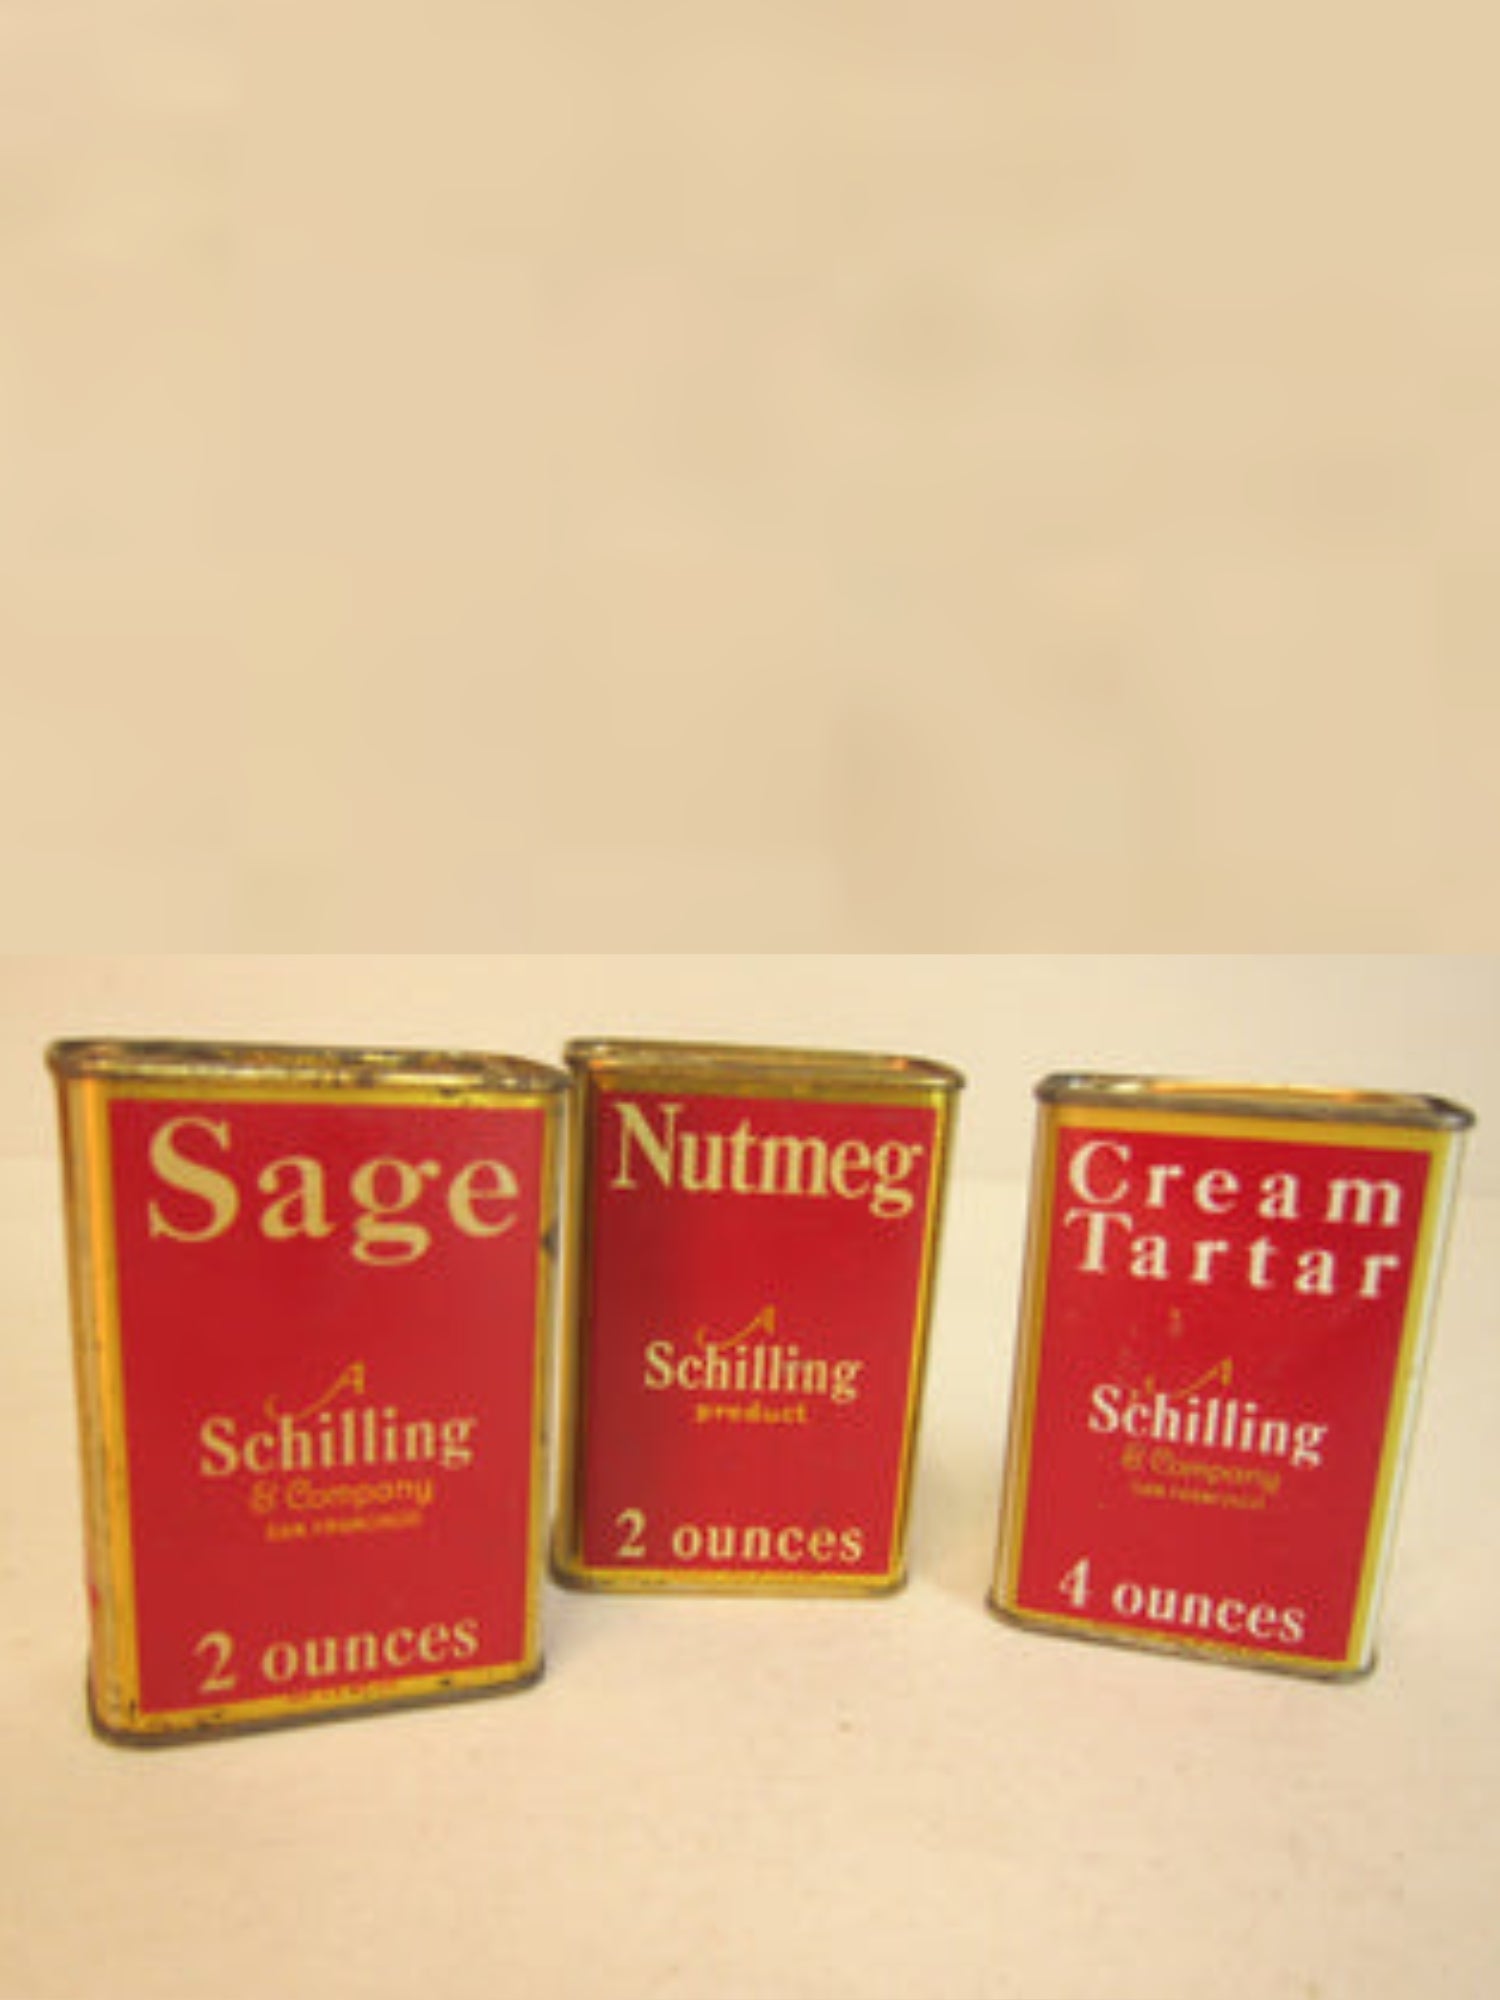 Shelly's Schilling spice cans